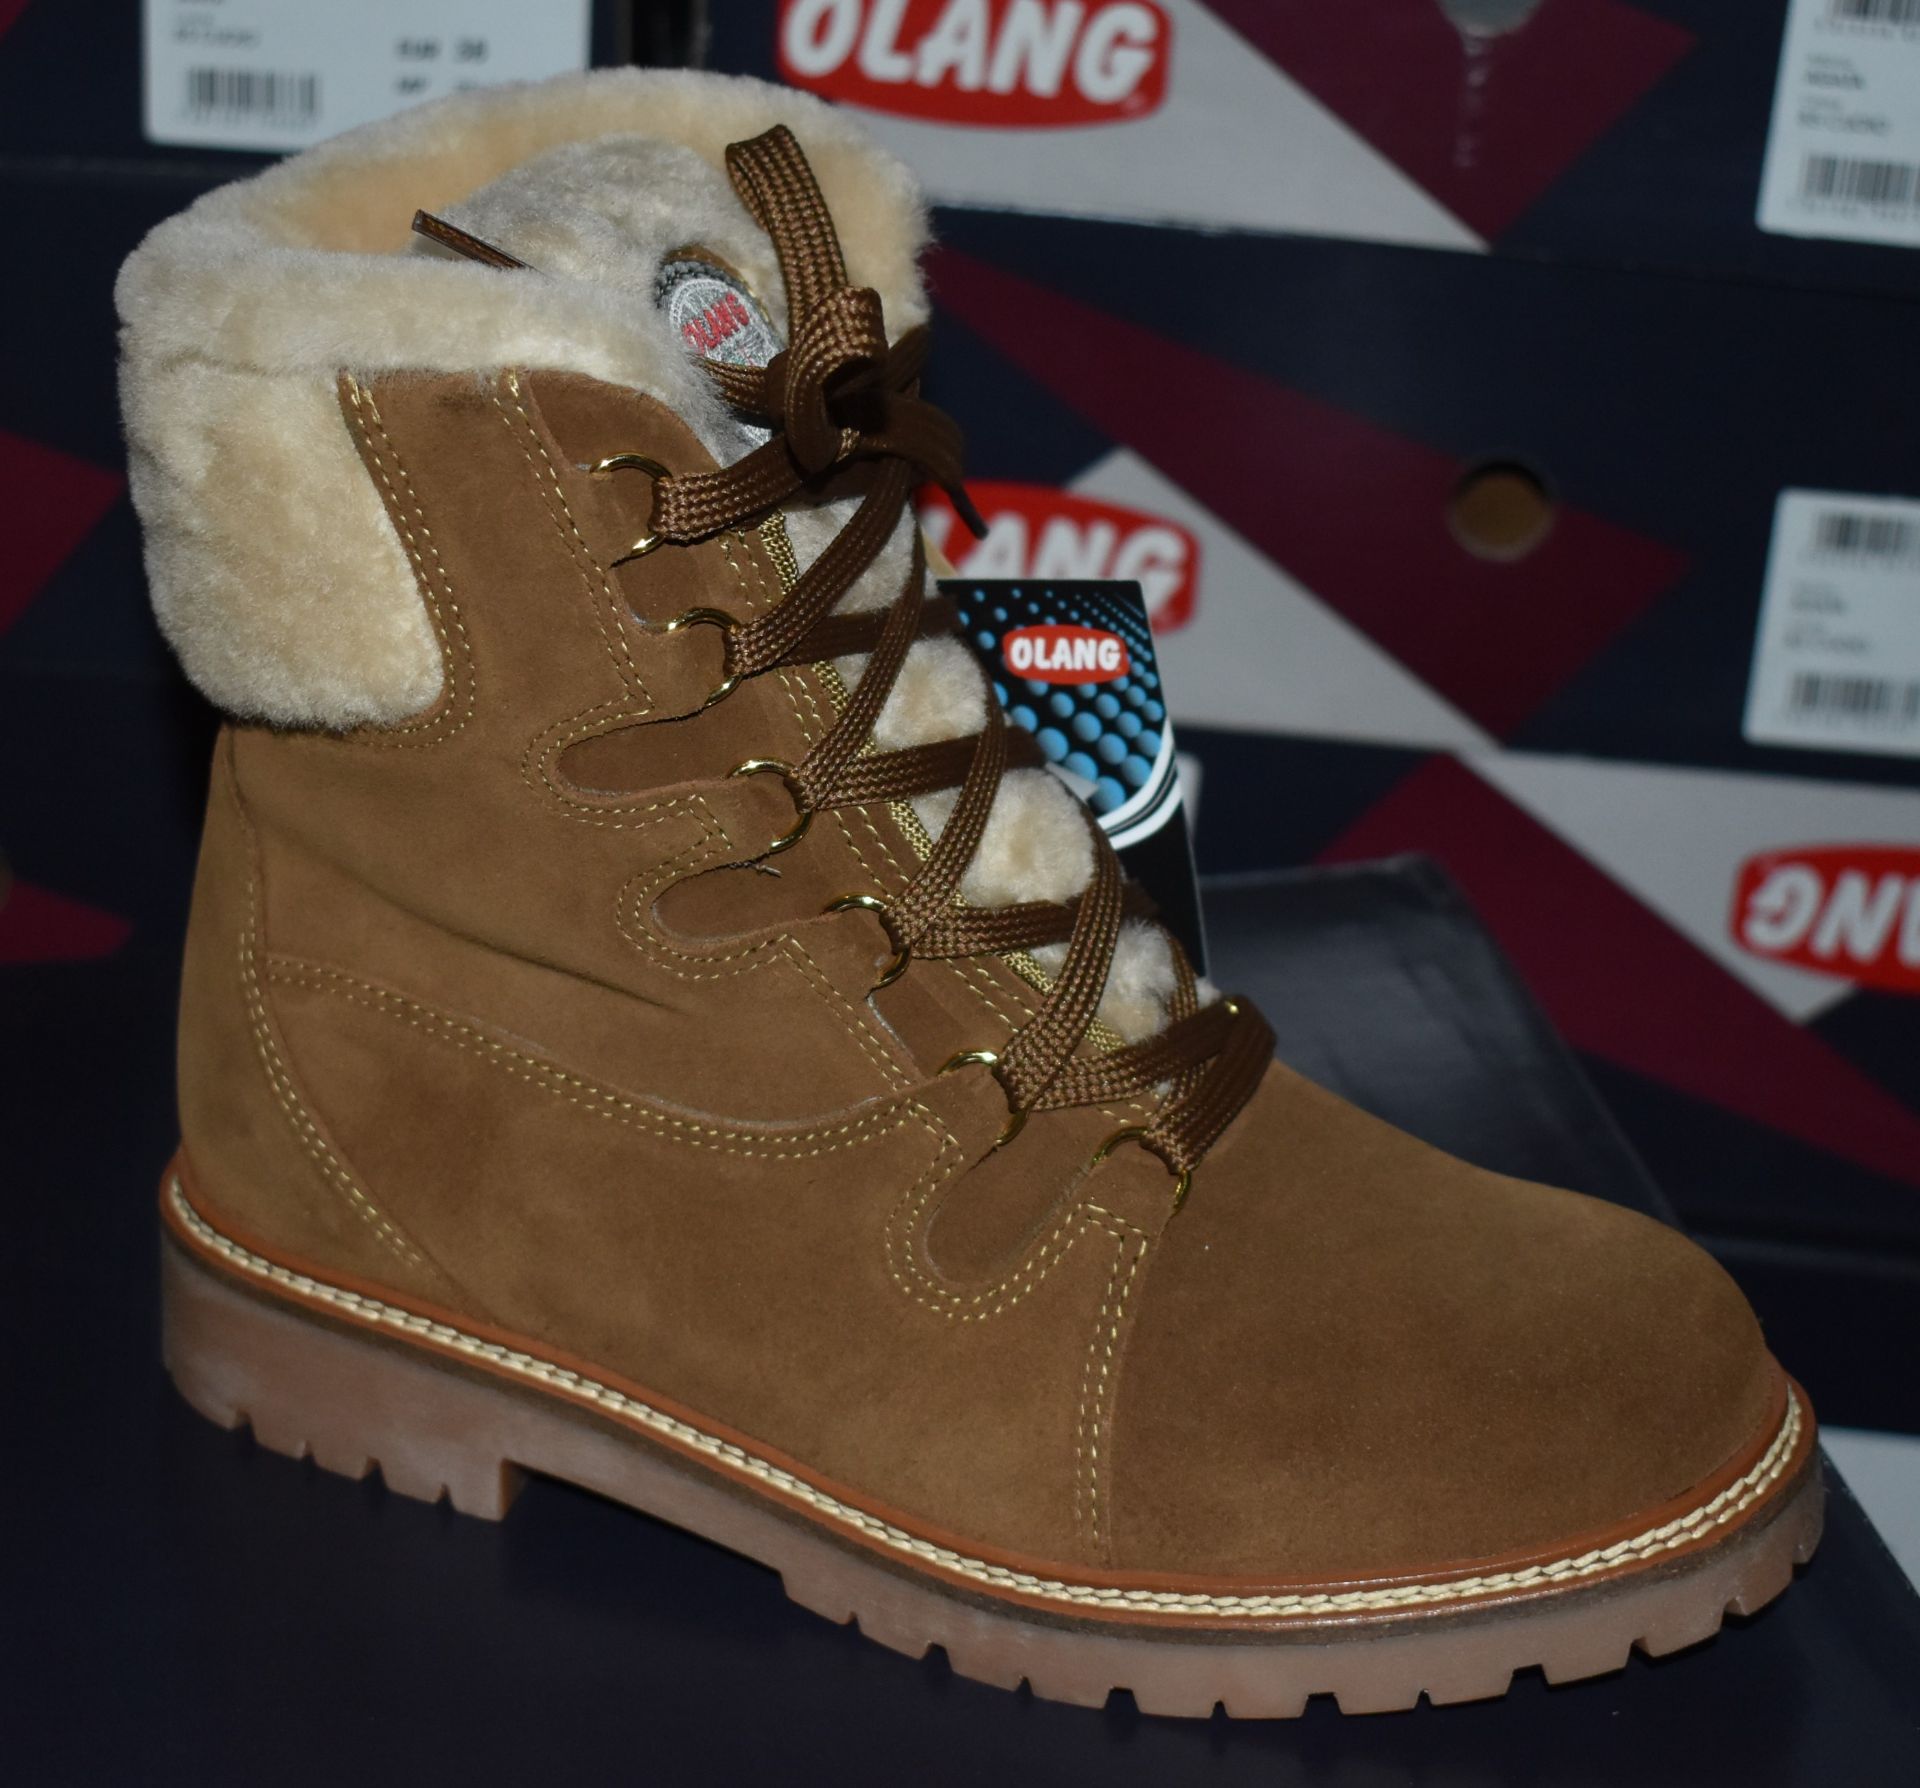 1 x Pair of Designer Olang Meribel 85 CUOIO Women's Winter Boots - Euro Size 37 - Brand New Boxed - Image 8 of 8